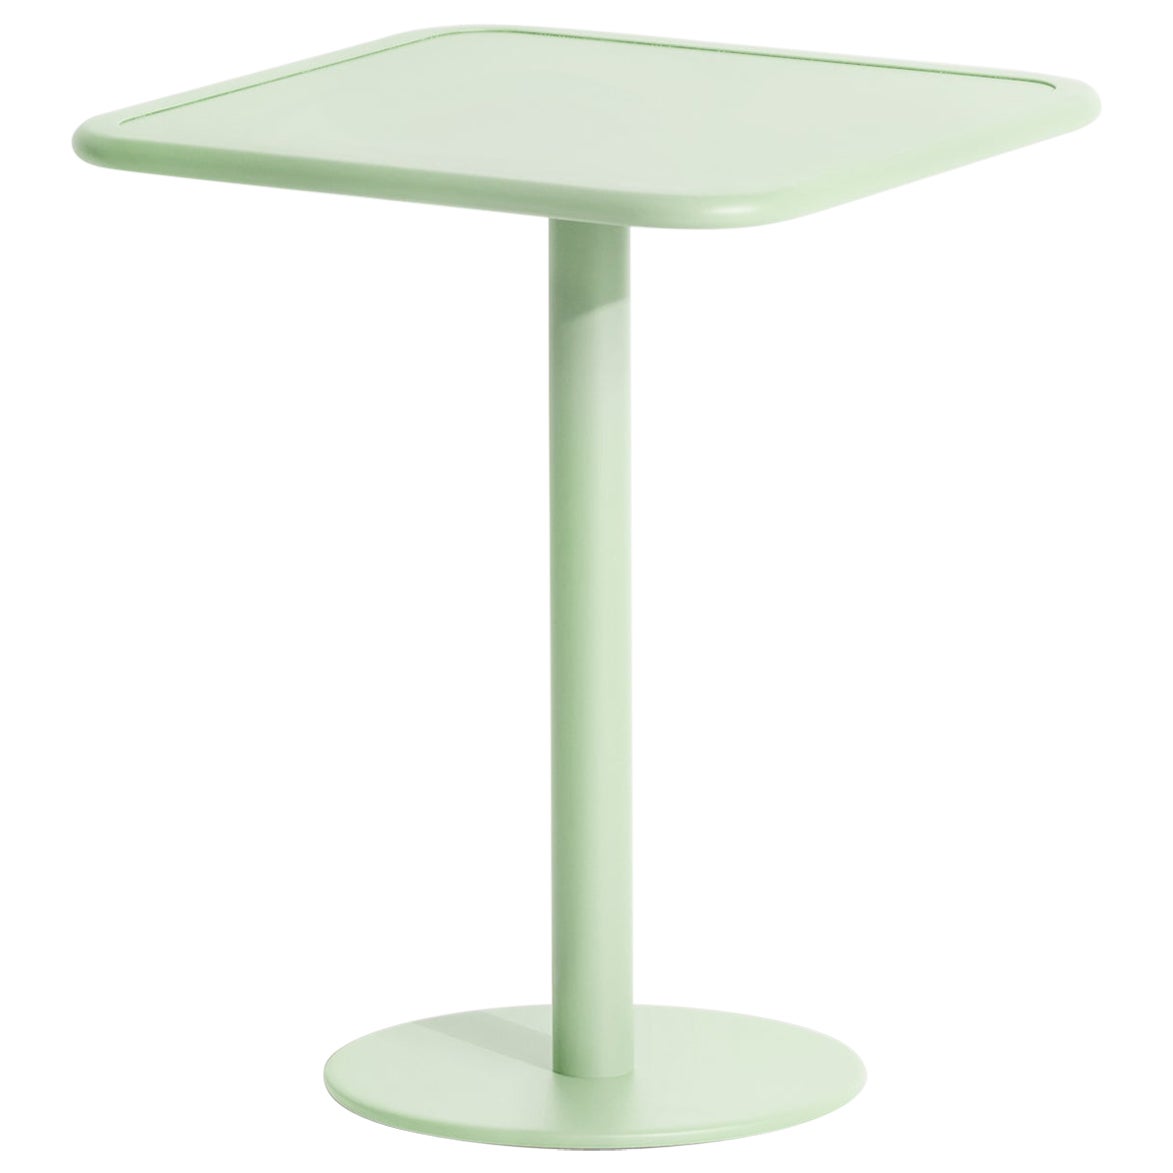 Petite Friture Week-End Bistro Square Dining Table in Pastel Green Aluminium For Sale